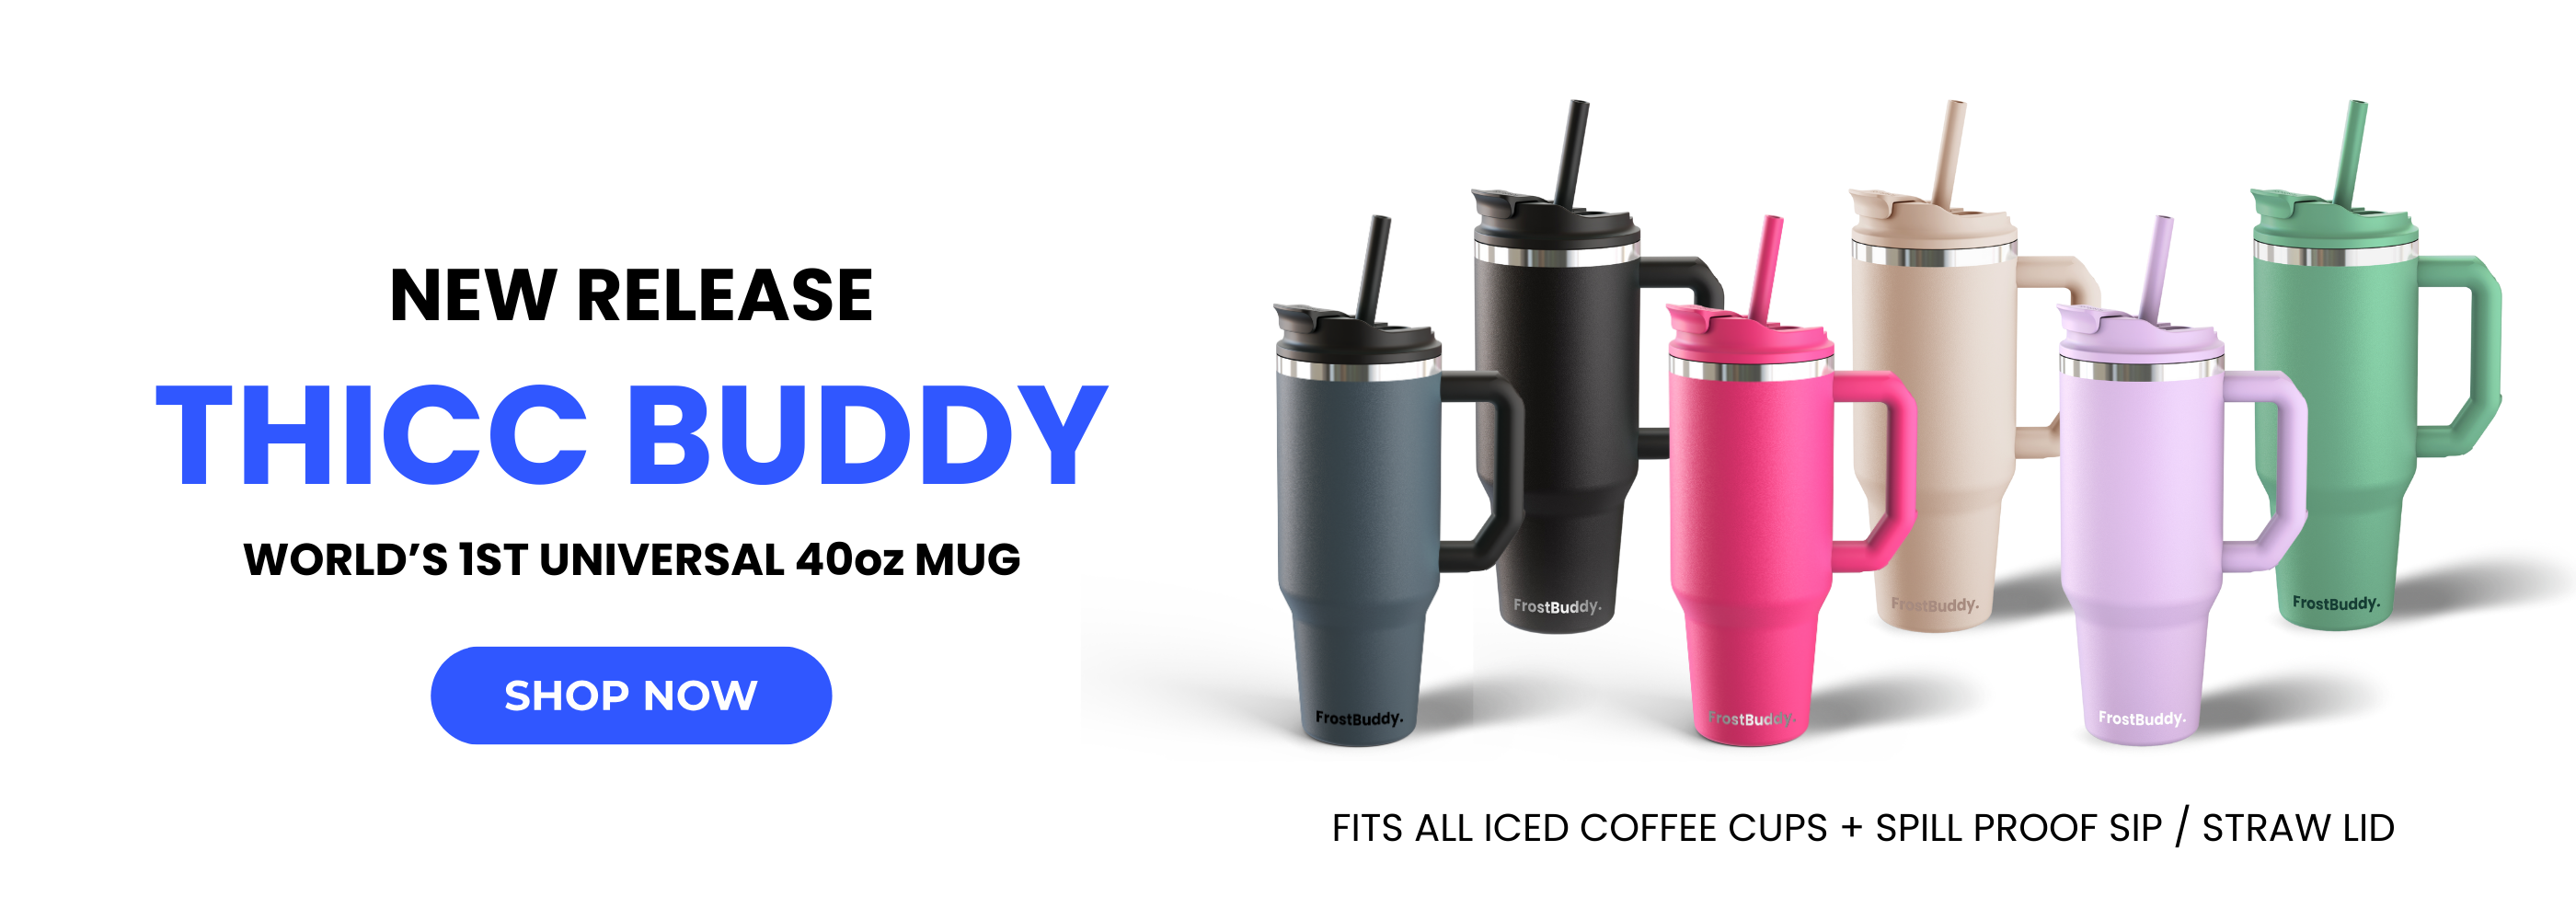 Frost Buddy® Universal Buddy 2.0 Review! 🧊🥤💯